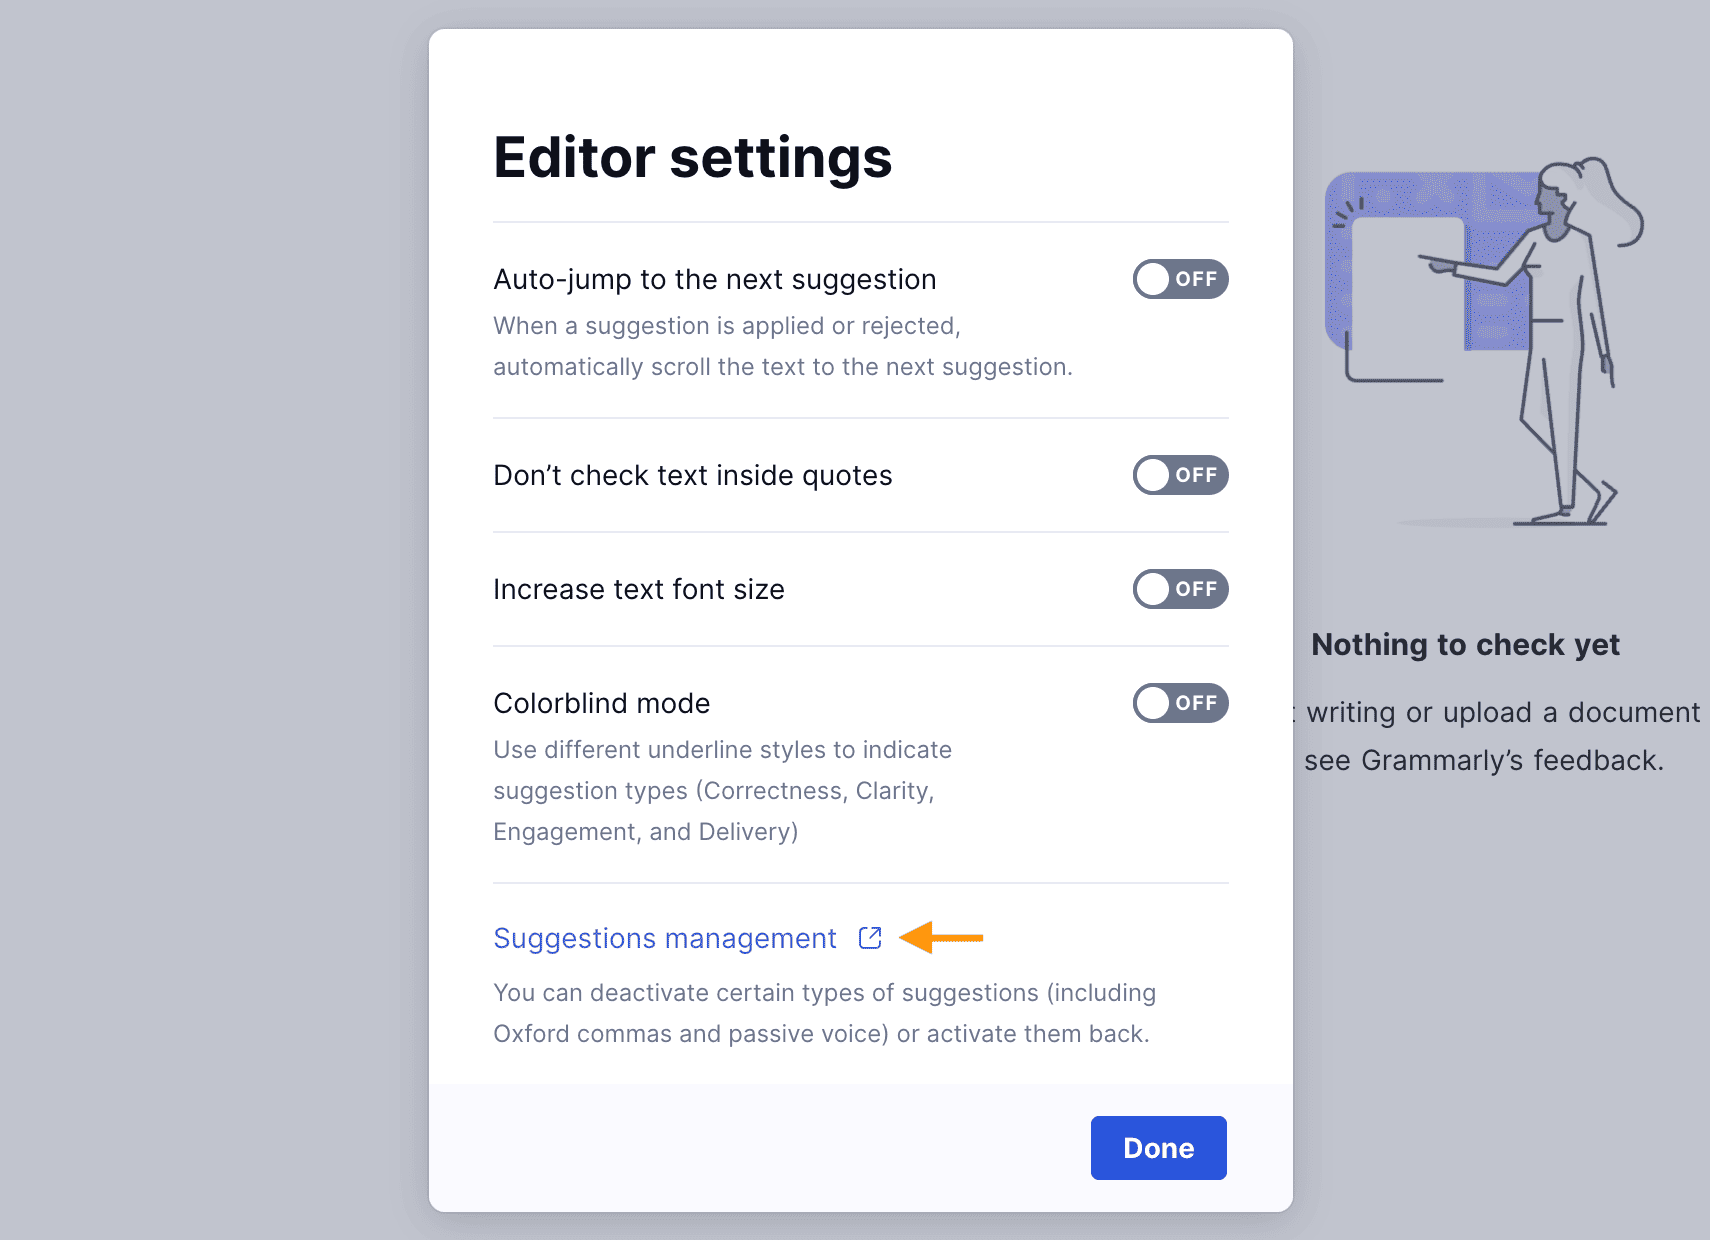 Suggestions management in Grammarly Editor Settings